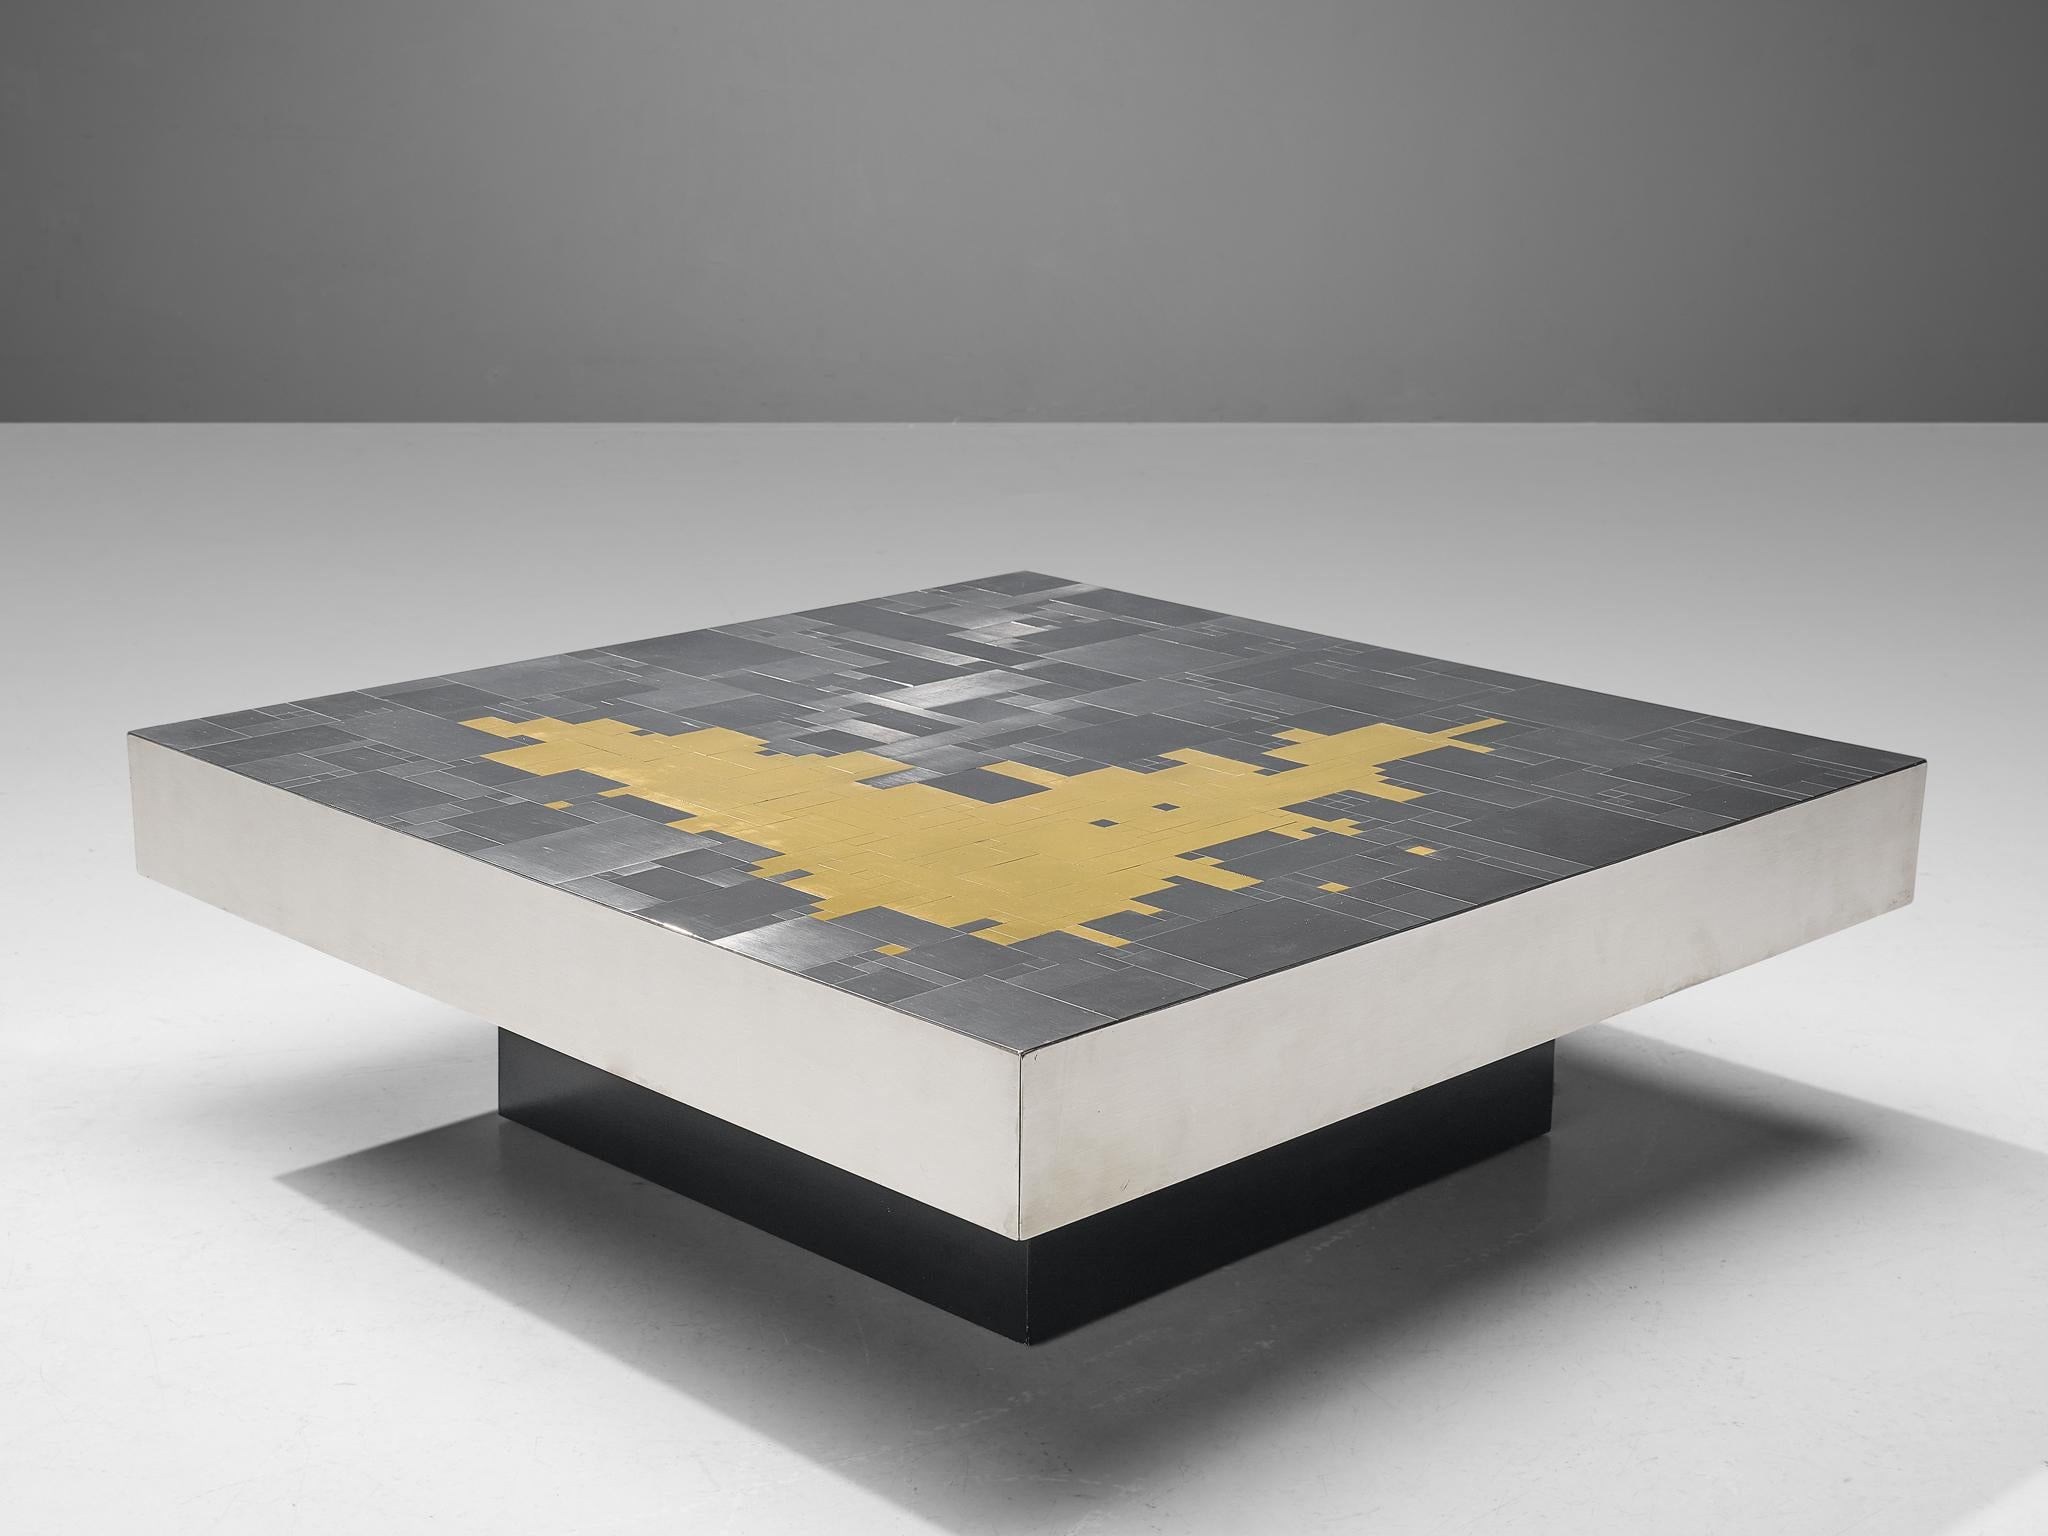 Jean Claude Dresse, coffee table, brass, steel, metal, wood, Belgium, 1970s

Square coffee table with striking tabletop designed by Jean Clause Dresse in the 1970s. Dresse is known for his bold designs, this table is no exception. A fragmented